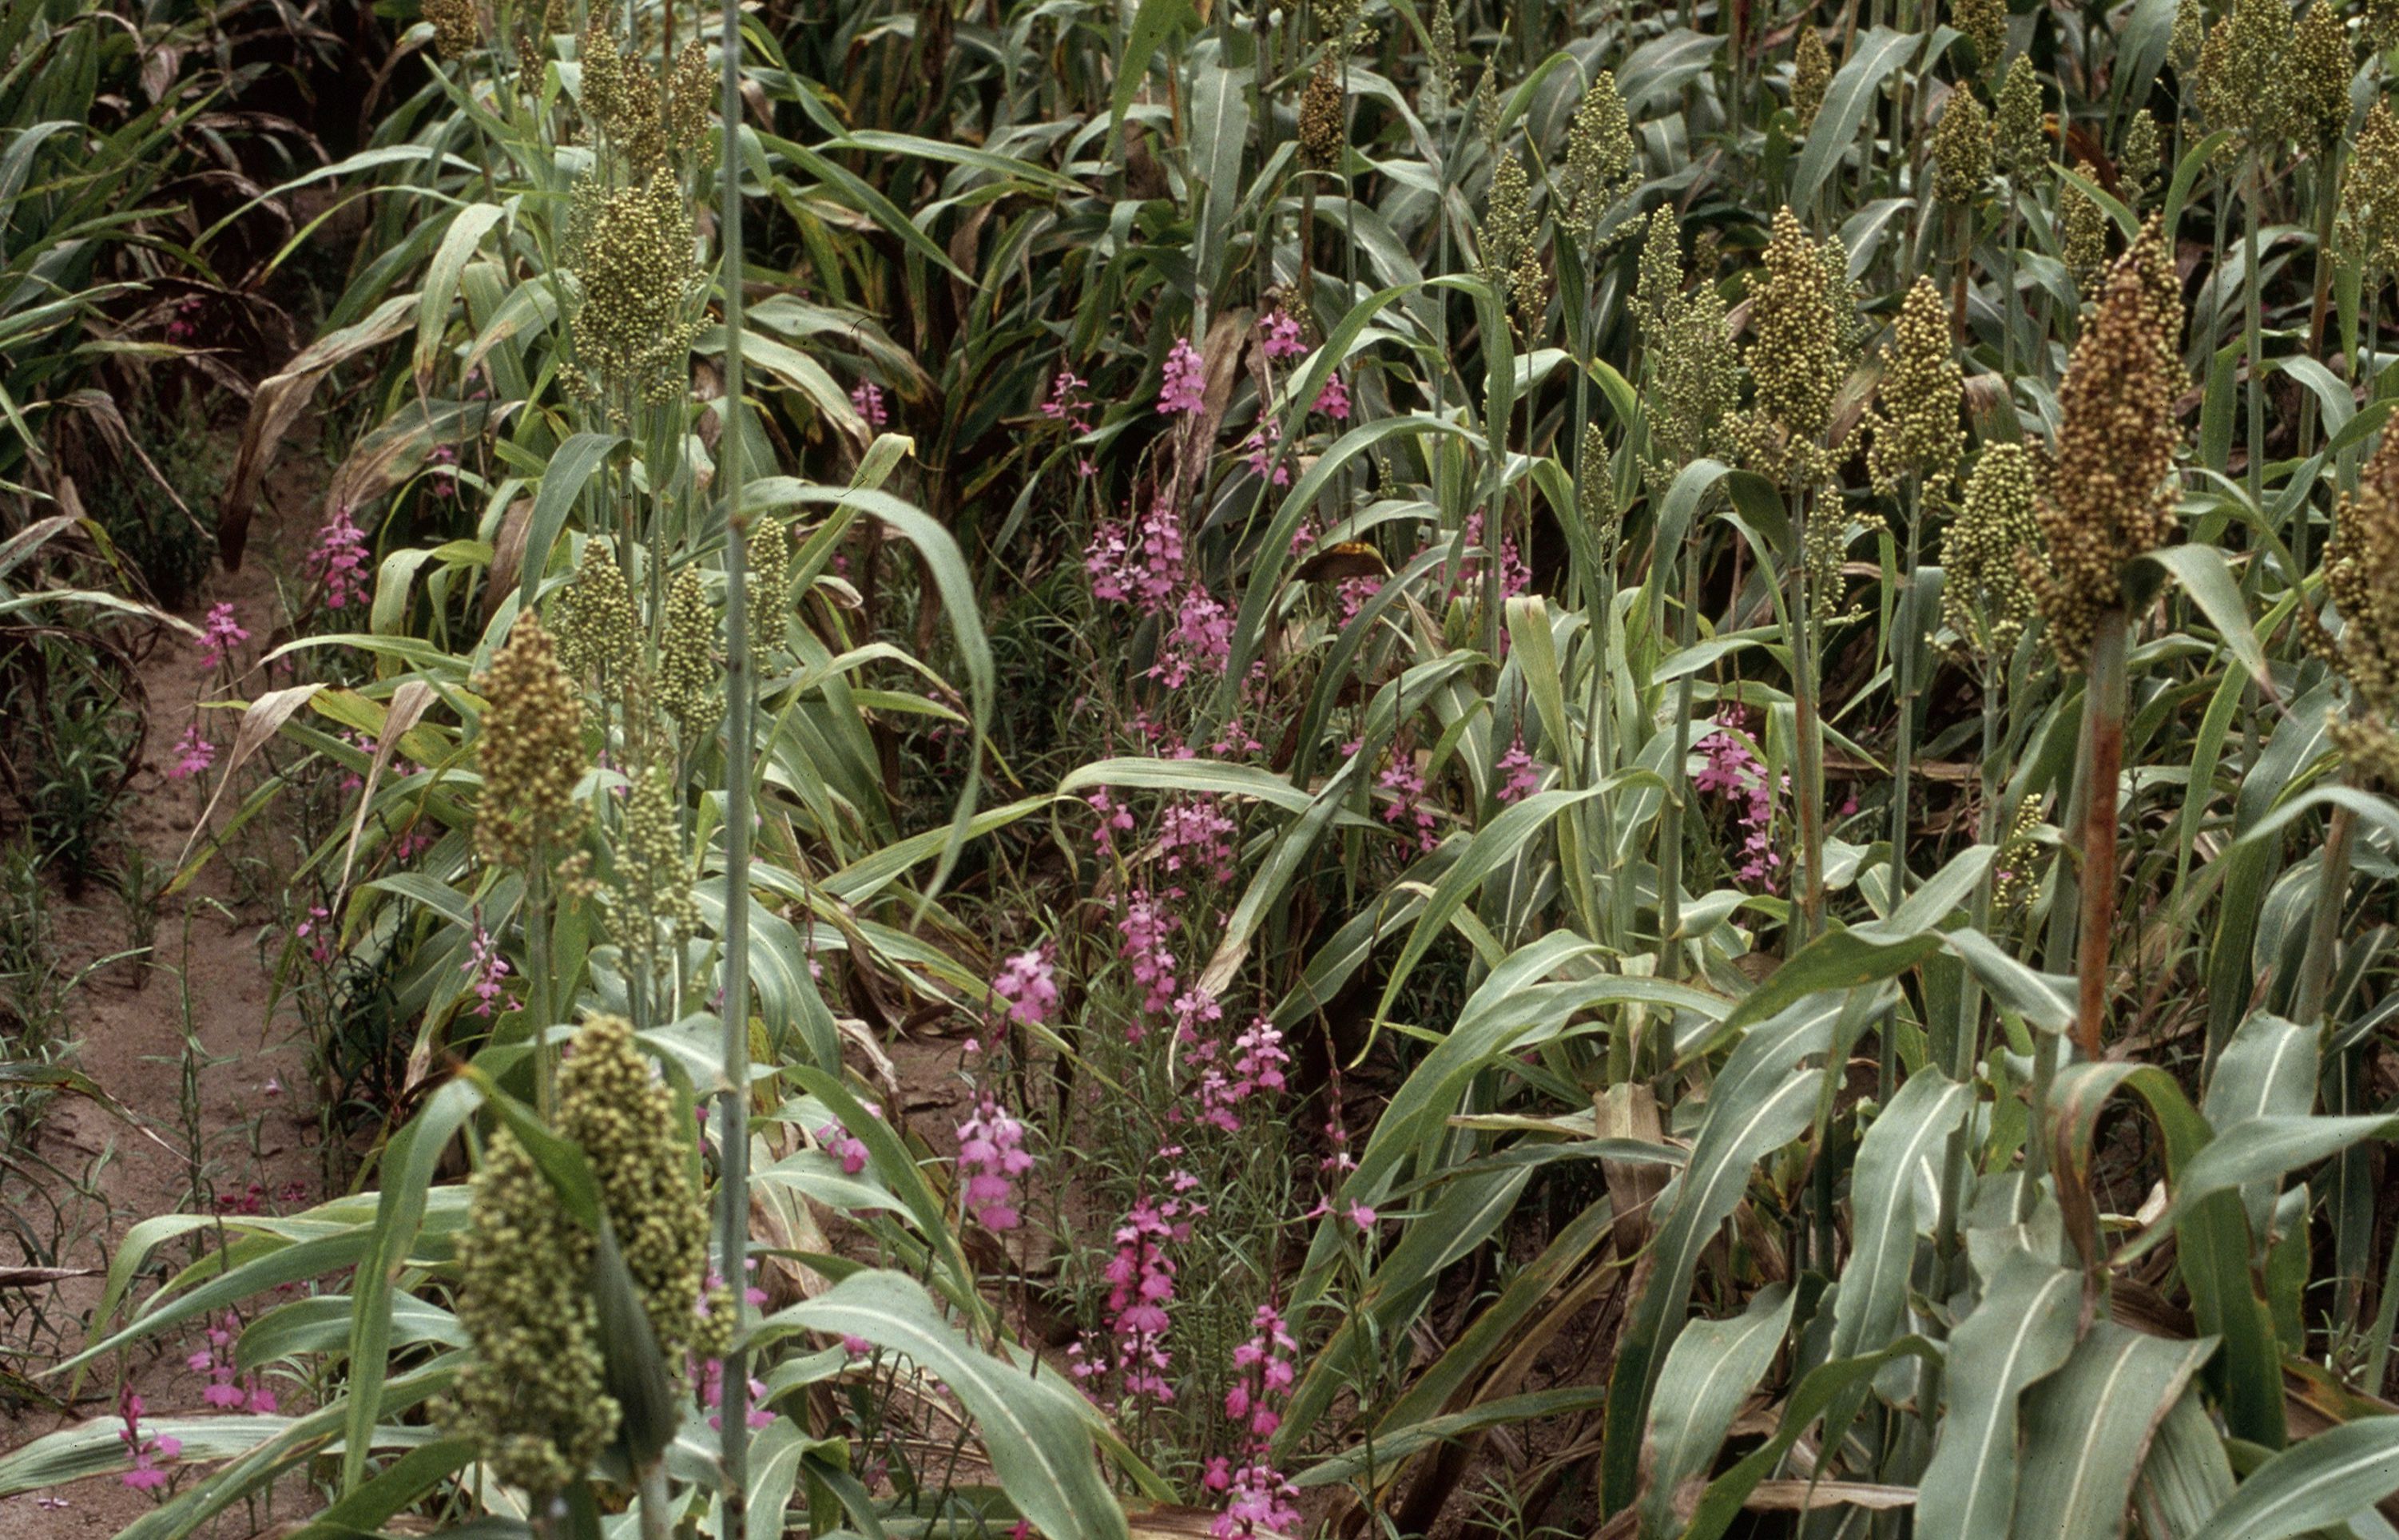 Sorghum, or broomcorn, is a staple crop in sub-Saharan Africa, but approximately 20% of annual yields are lost due to infections with witchweed (Striga hermonthica), a parasitic plant that steals nutrients and water by latching onto the plant’s roots. Pictured here, rows sorghum with Striga (purple). (USDA APHIS PPQ - Oxford, North Carolina, USDA APHIS PPQ, Bugwood.org / Wikimedia)